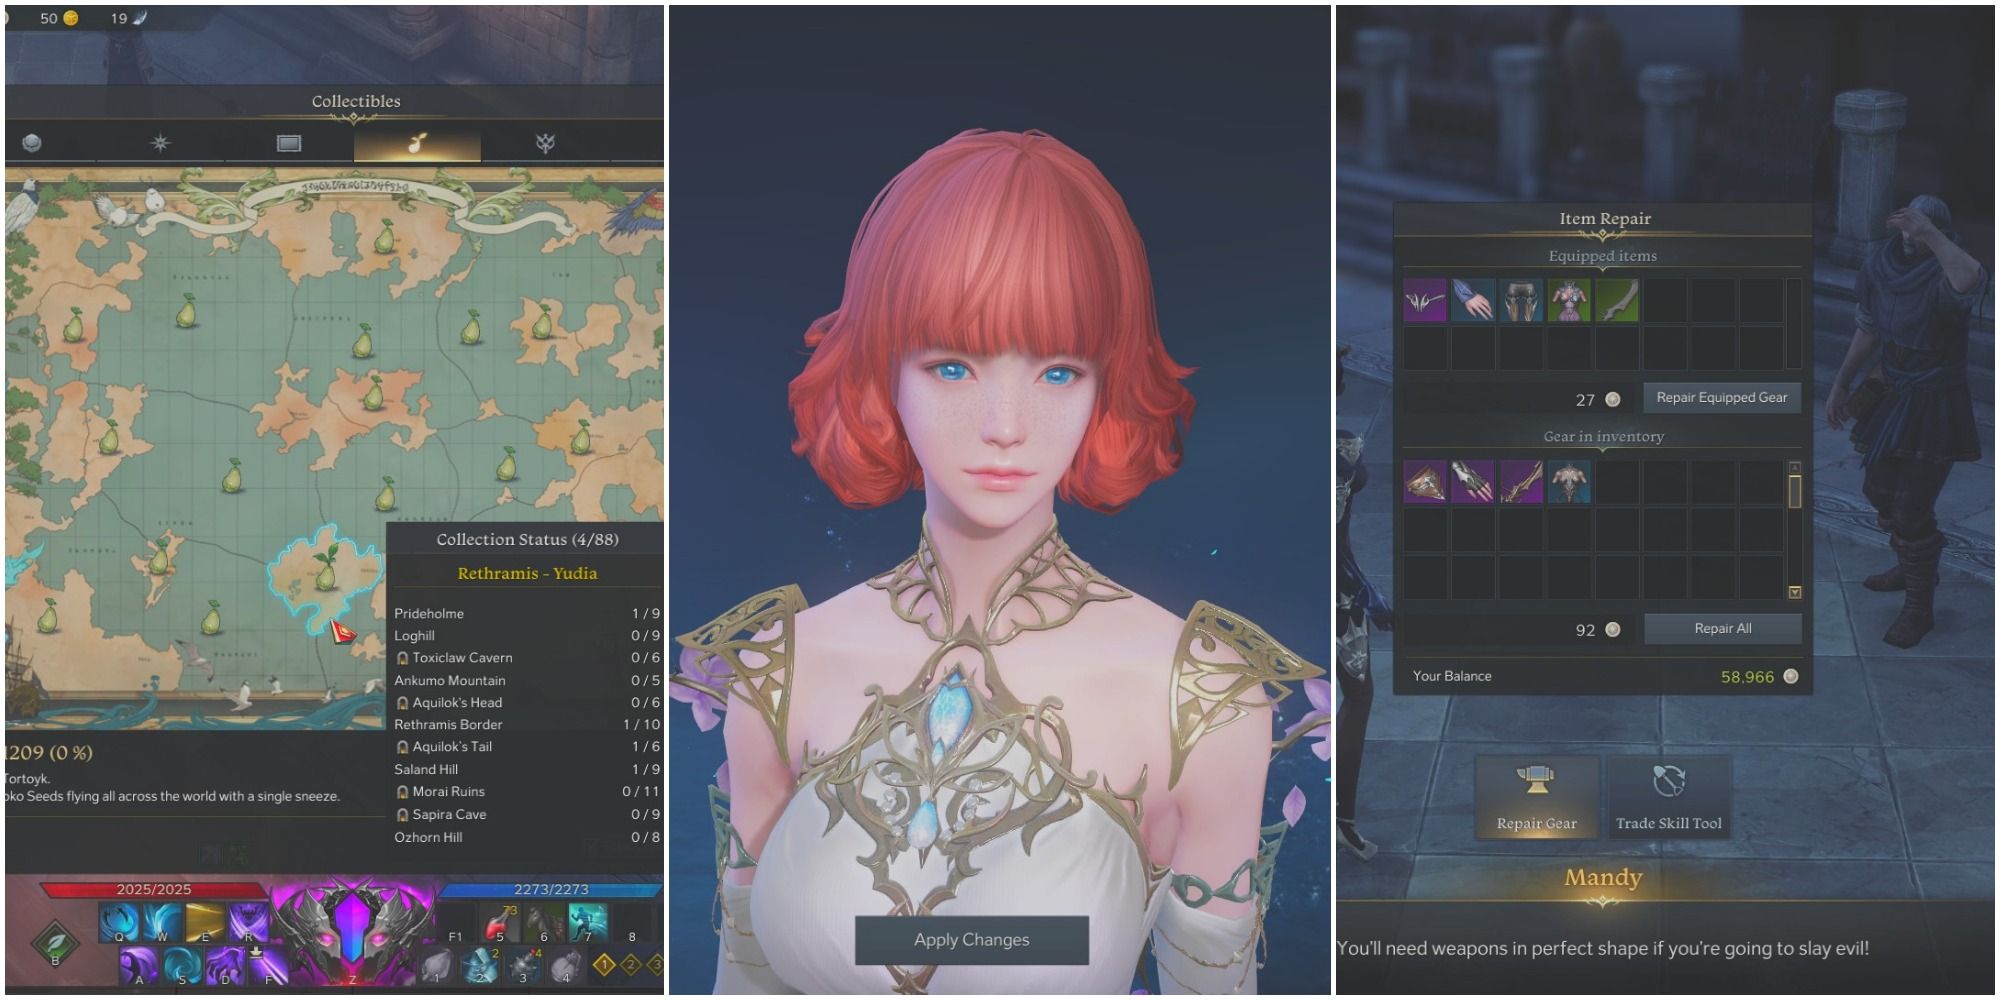 Split image from left to right: Mokoko Seeds map, red-haired mage on character creation screen, Item Repair shop in dark monastery